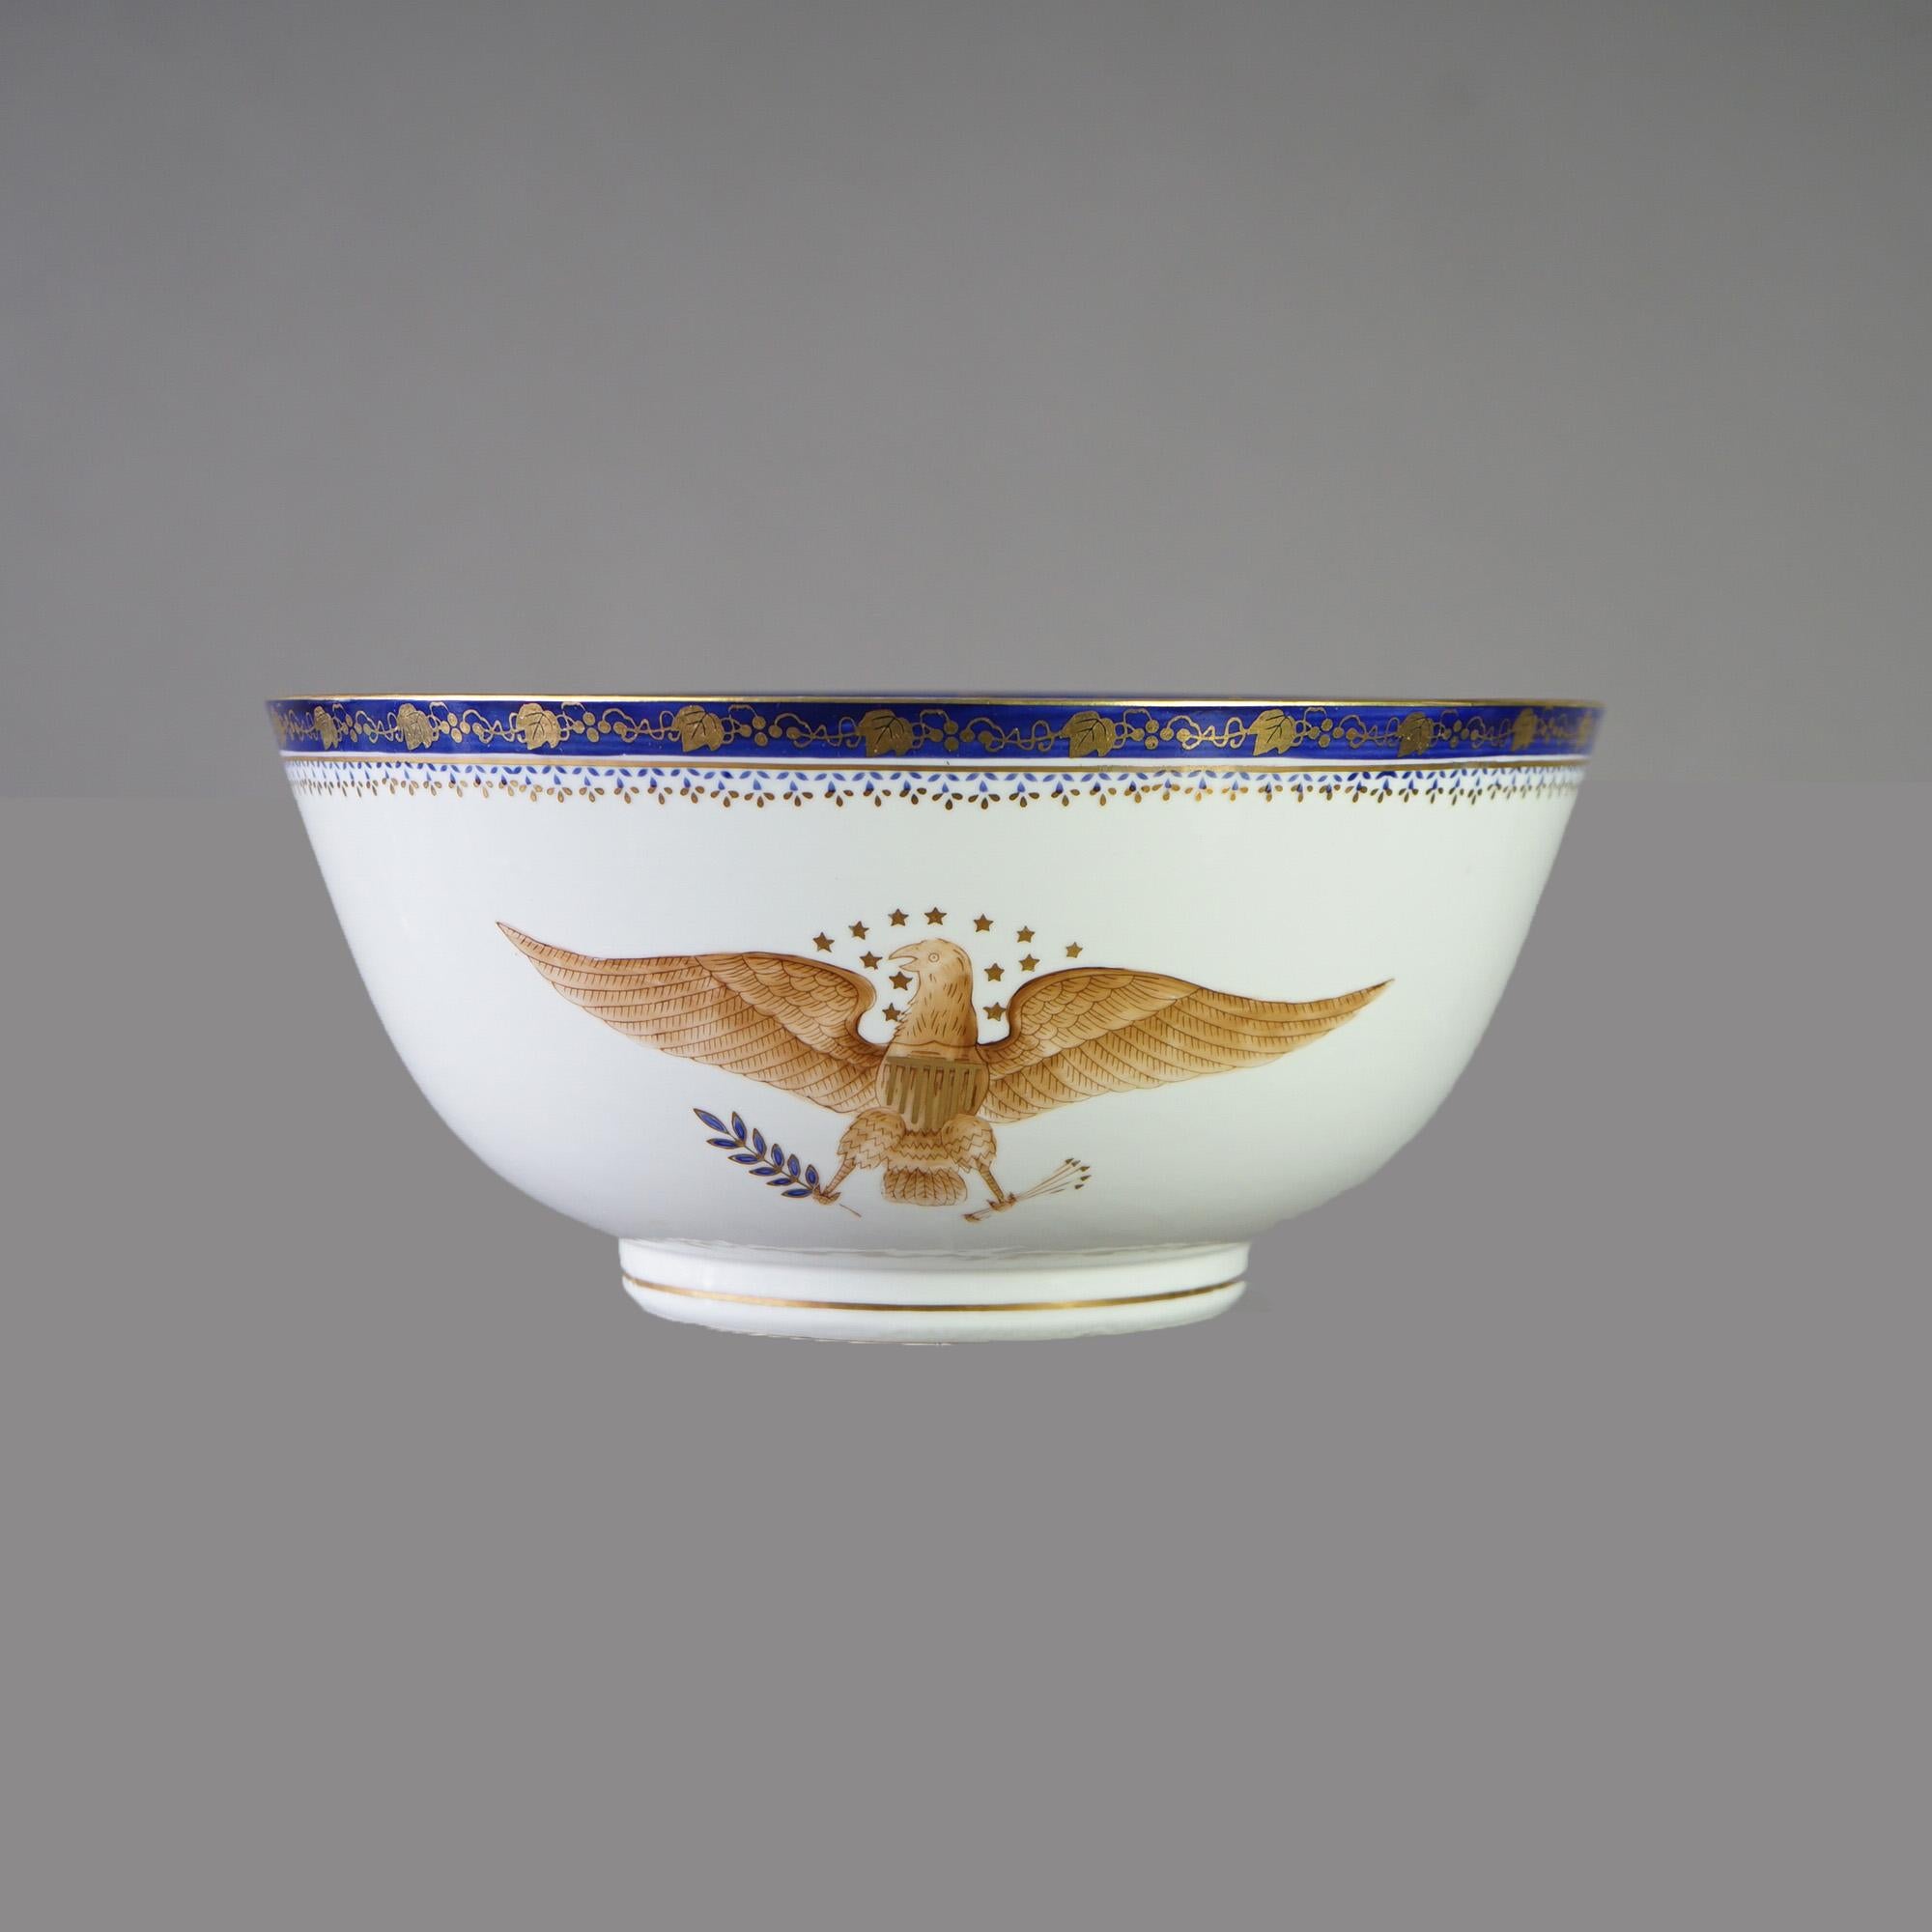 Federal Antique Chinese Export Armorial Eagle Hand Painted & Gilt Porcelain Bowl 20th C